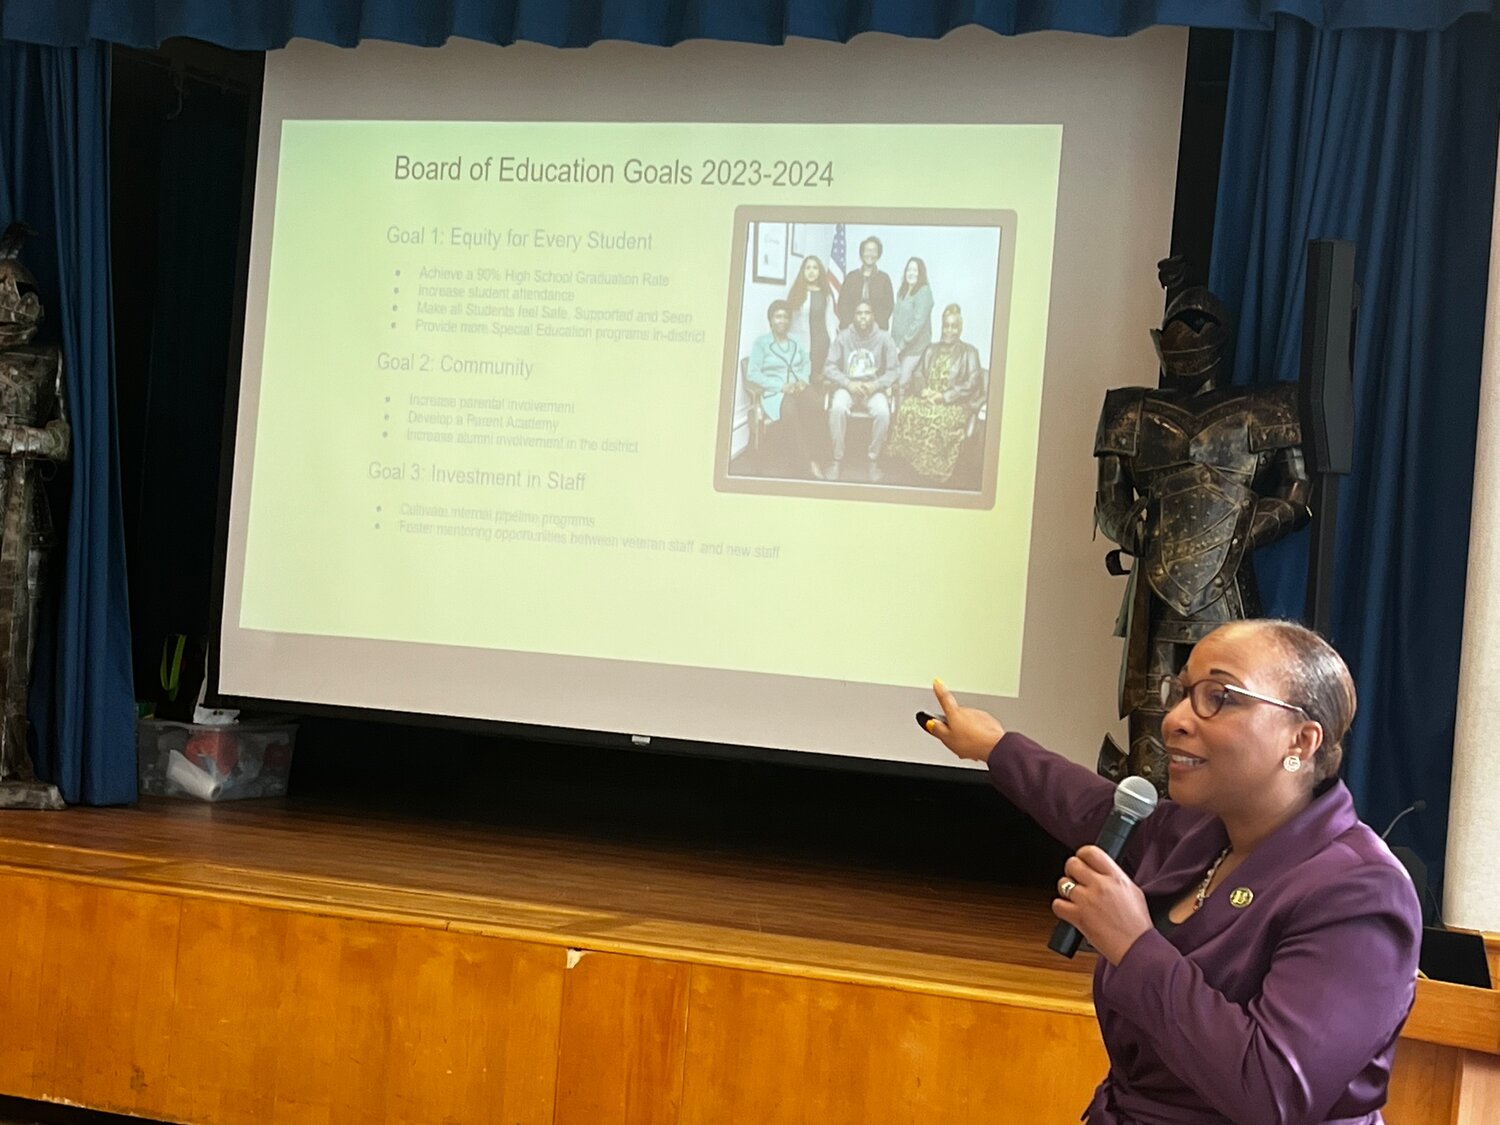 Uniondale’s Superintendent Monique Darrisaw-Akil, giving a presentation on the district’s goals for this school year, breaking down how they will achieve each.